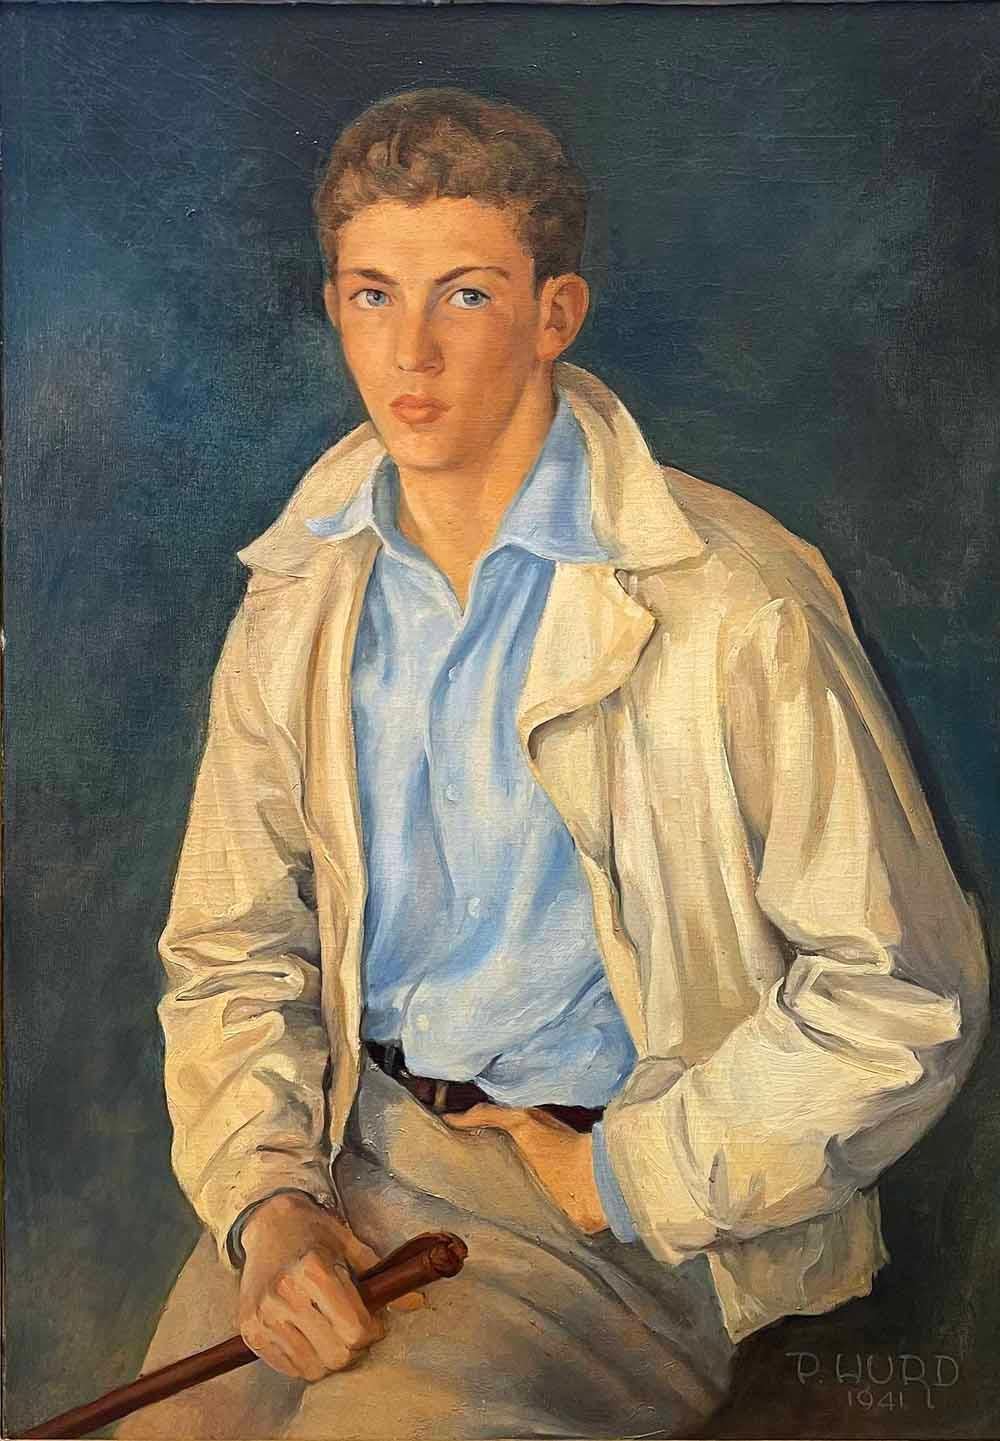 Perhaps the finest portrait we have ever offered, this depiction of a young jockey in 1941, his complexion warm and glowing and his blue eyes echoing the color of his shirt, was painted by Peter Hurd, one of New Mexico's most important artists in